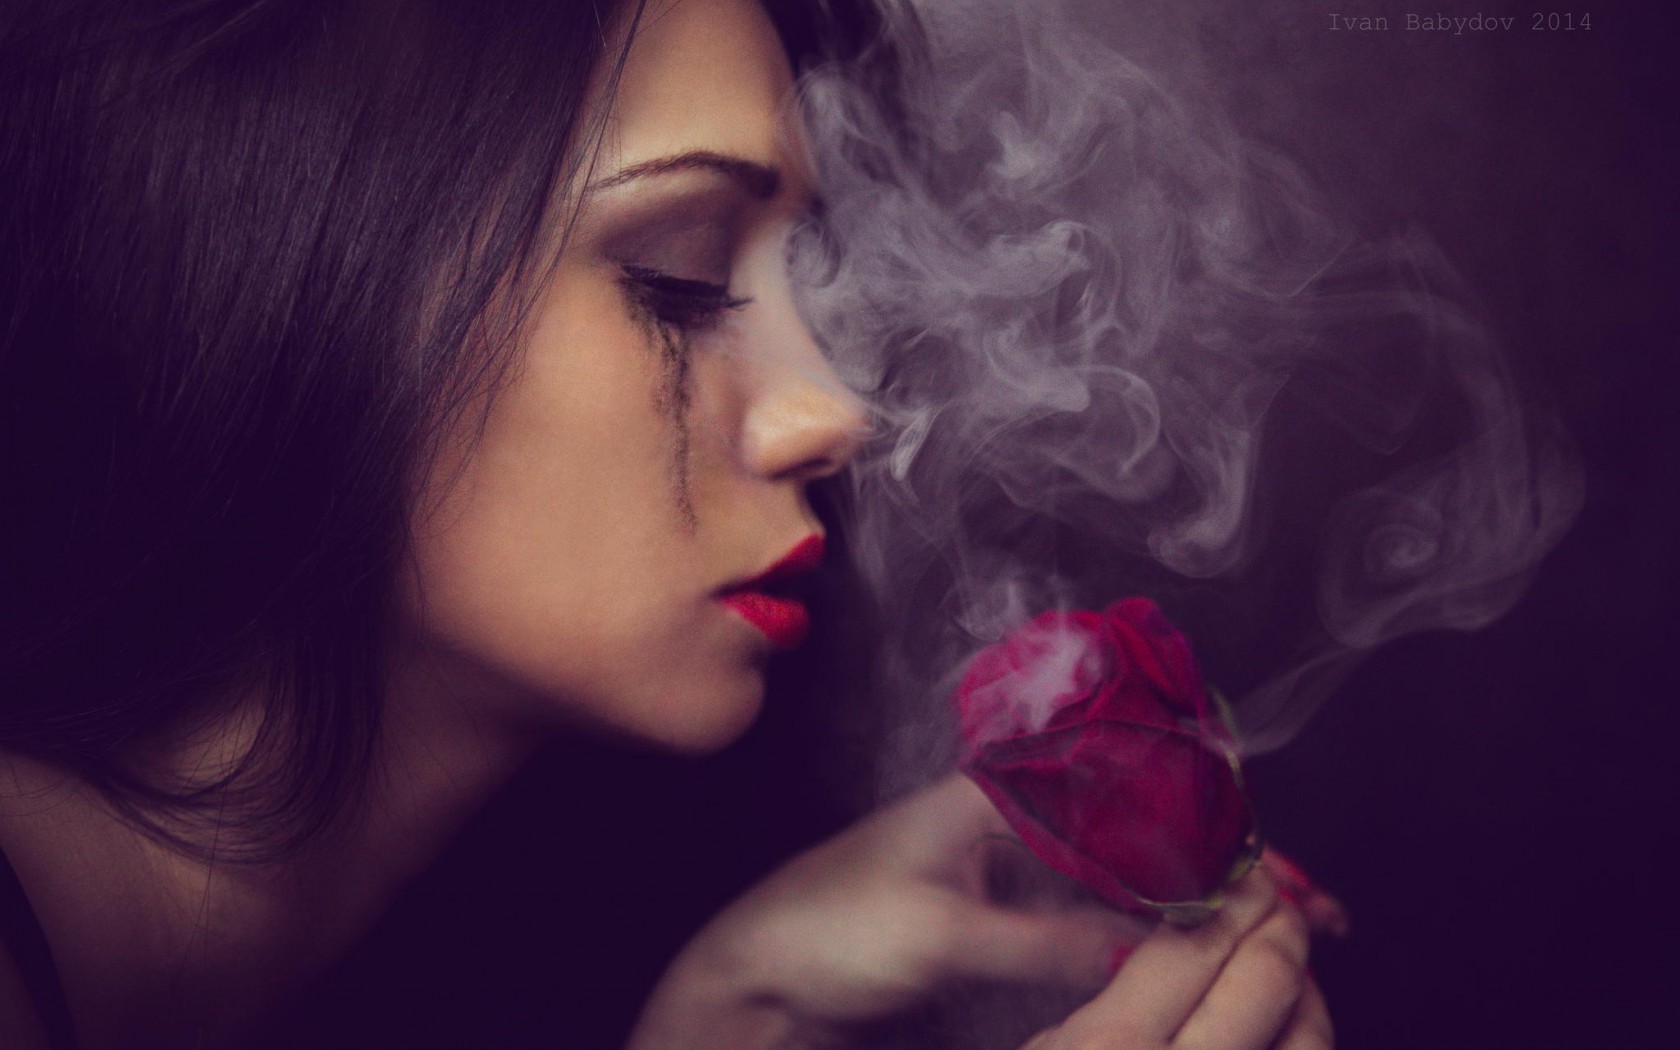 The girl looks at smoking rose wallpapers and images - wallpapers